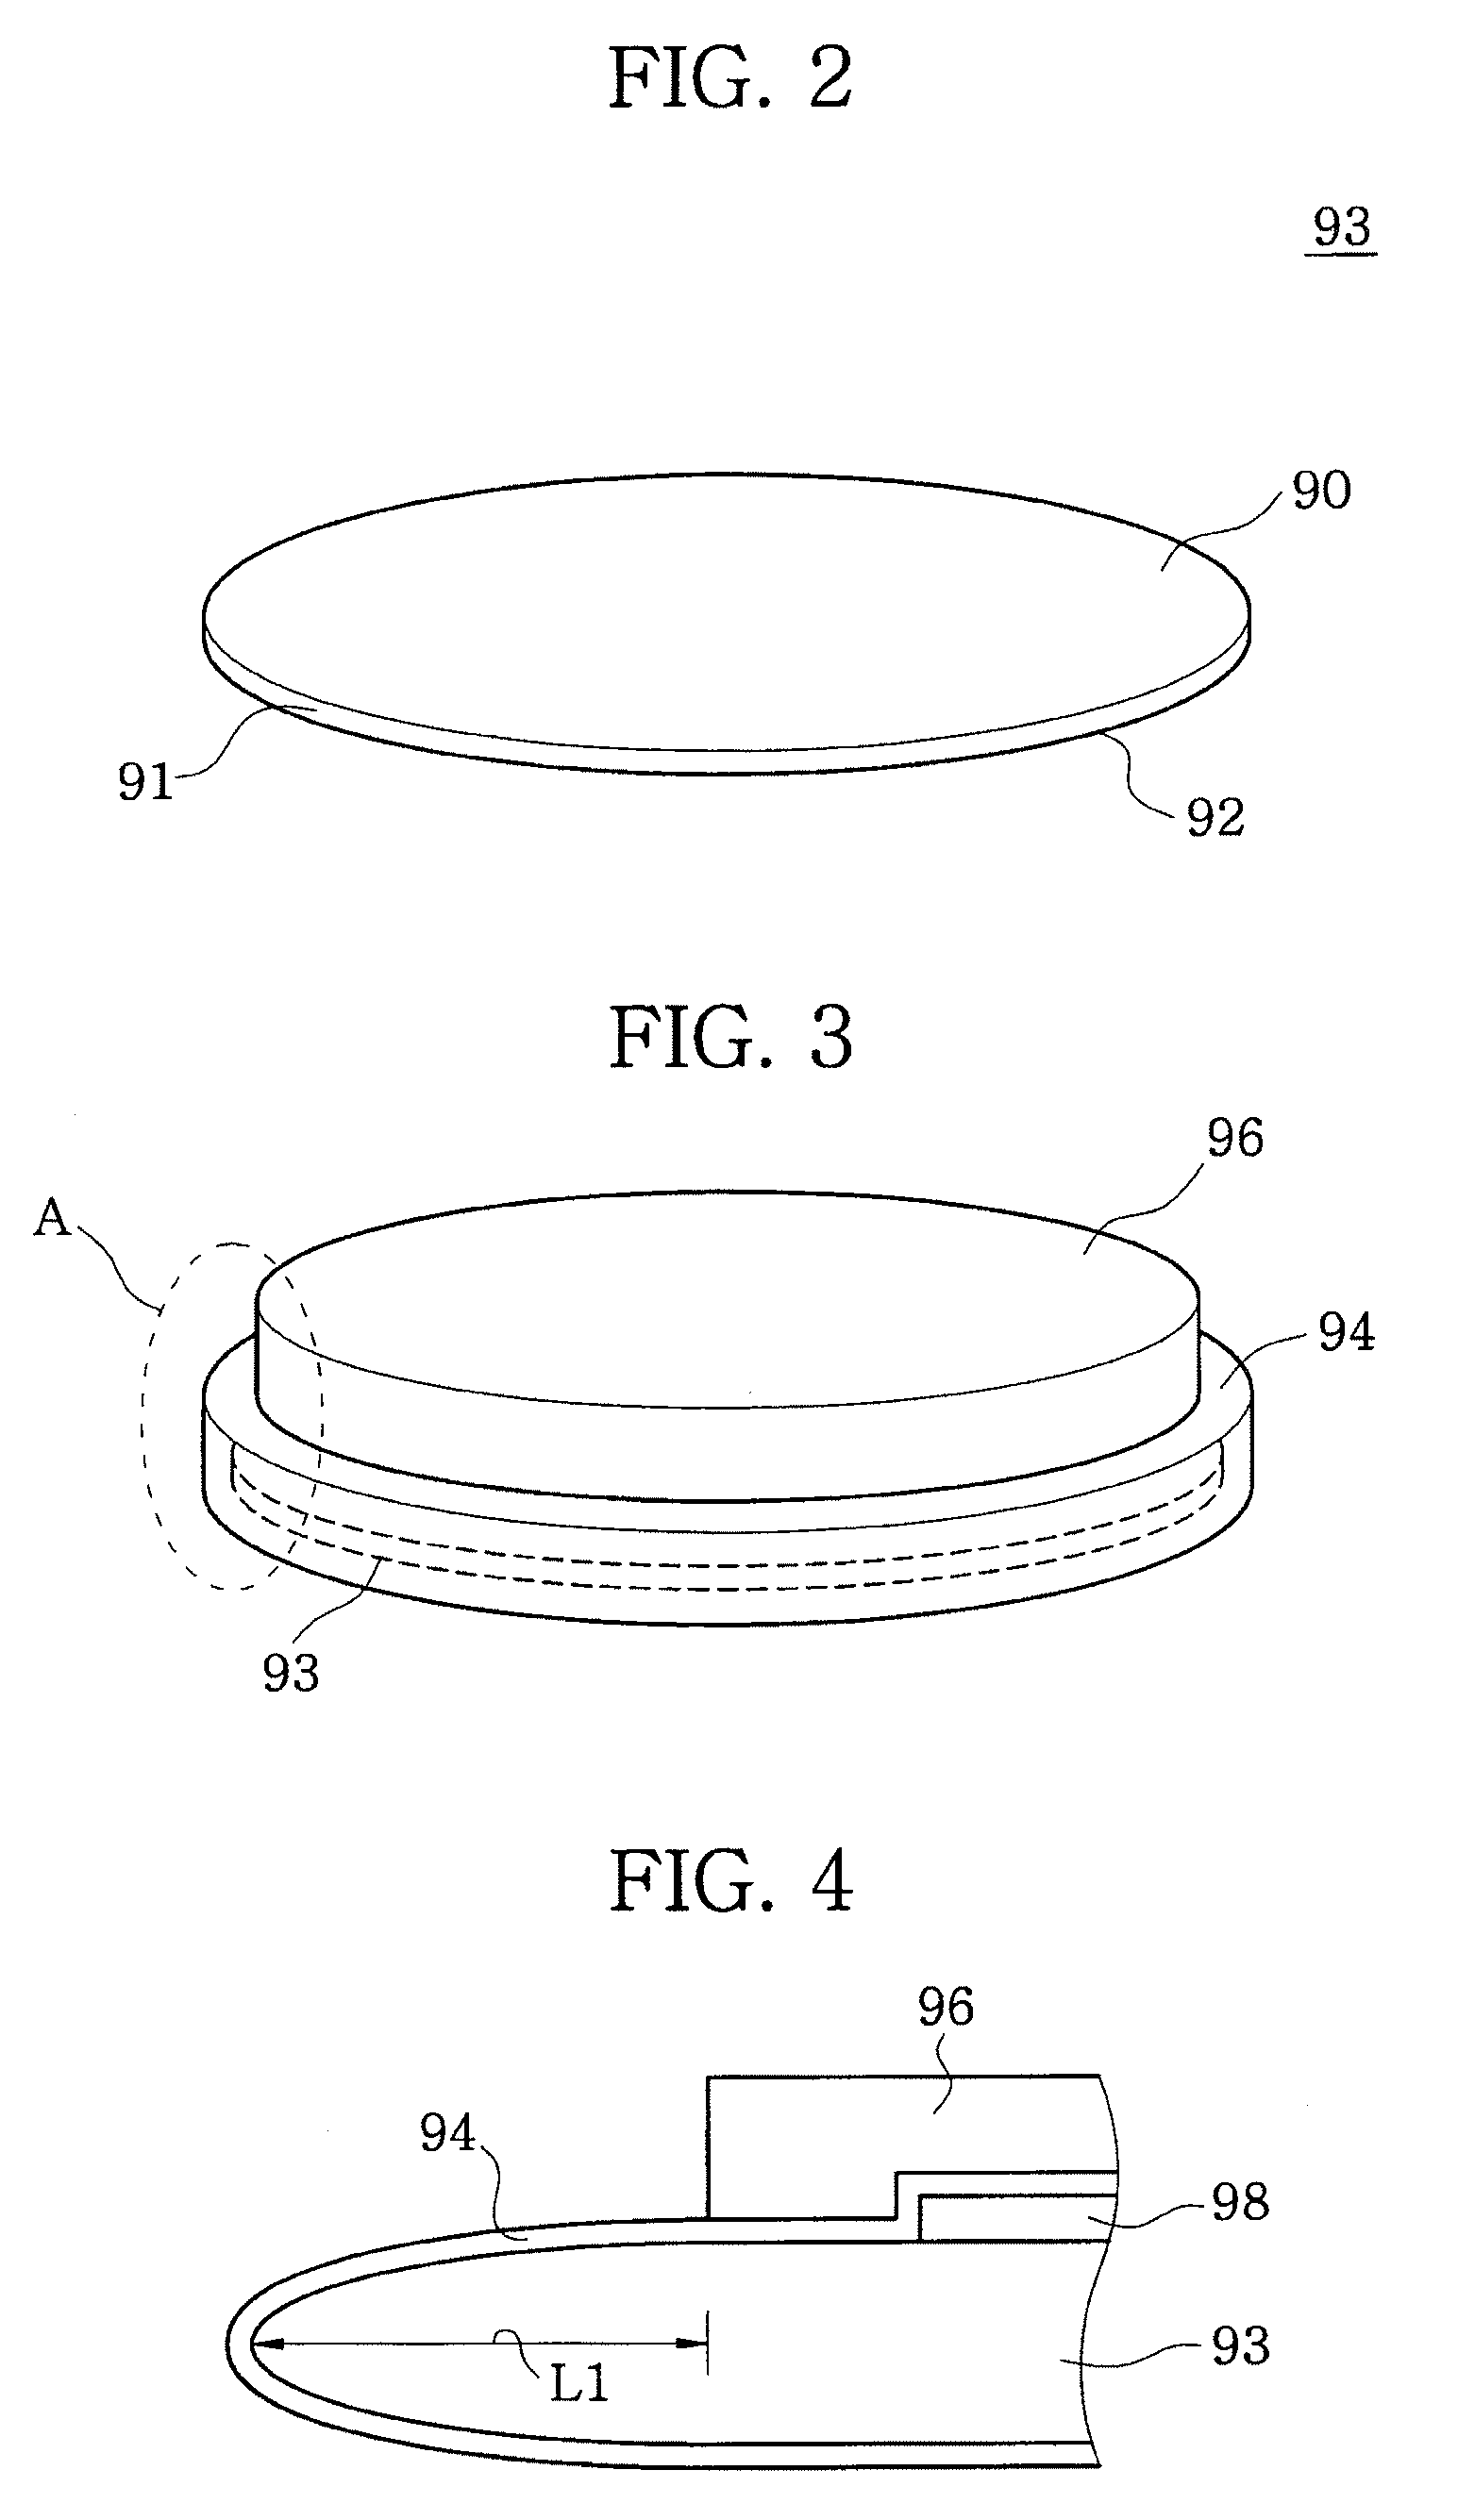 Semiconductor fabrication apparatuses to perform semiconductor etching and deposition processes and methods of forming semiconductor device using the same